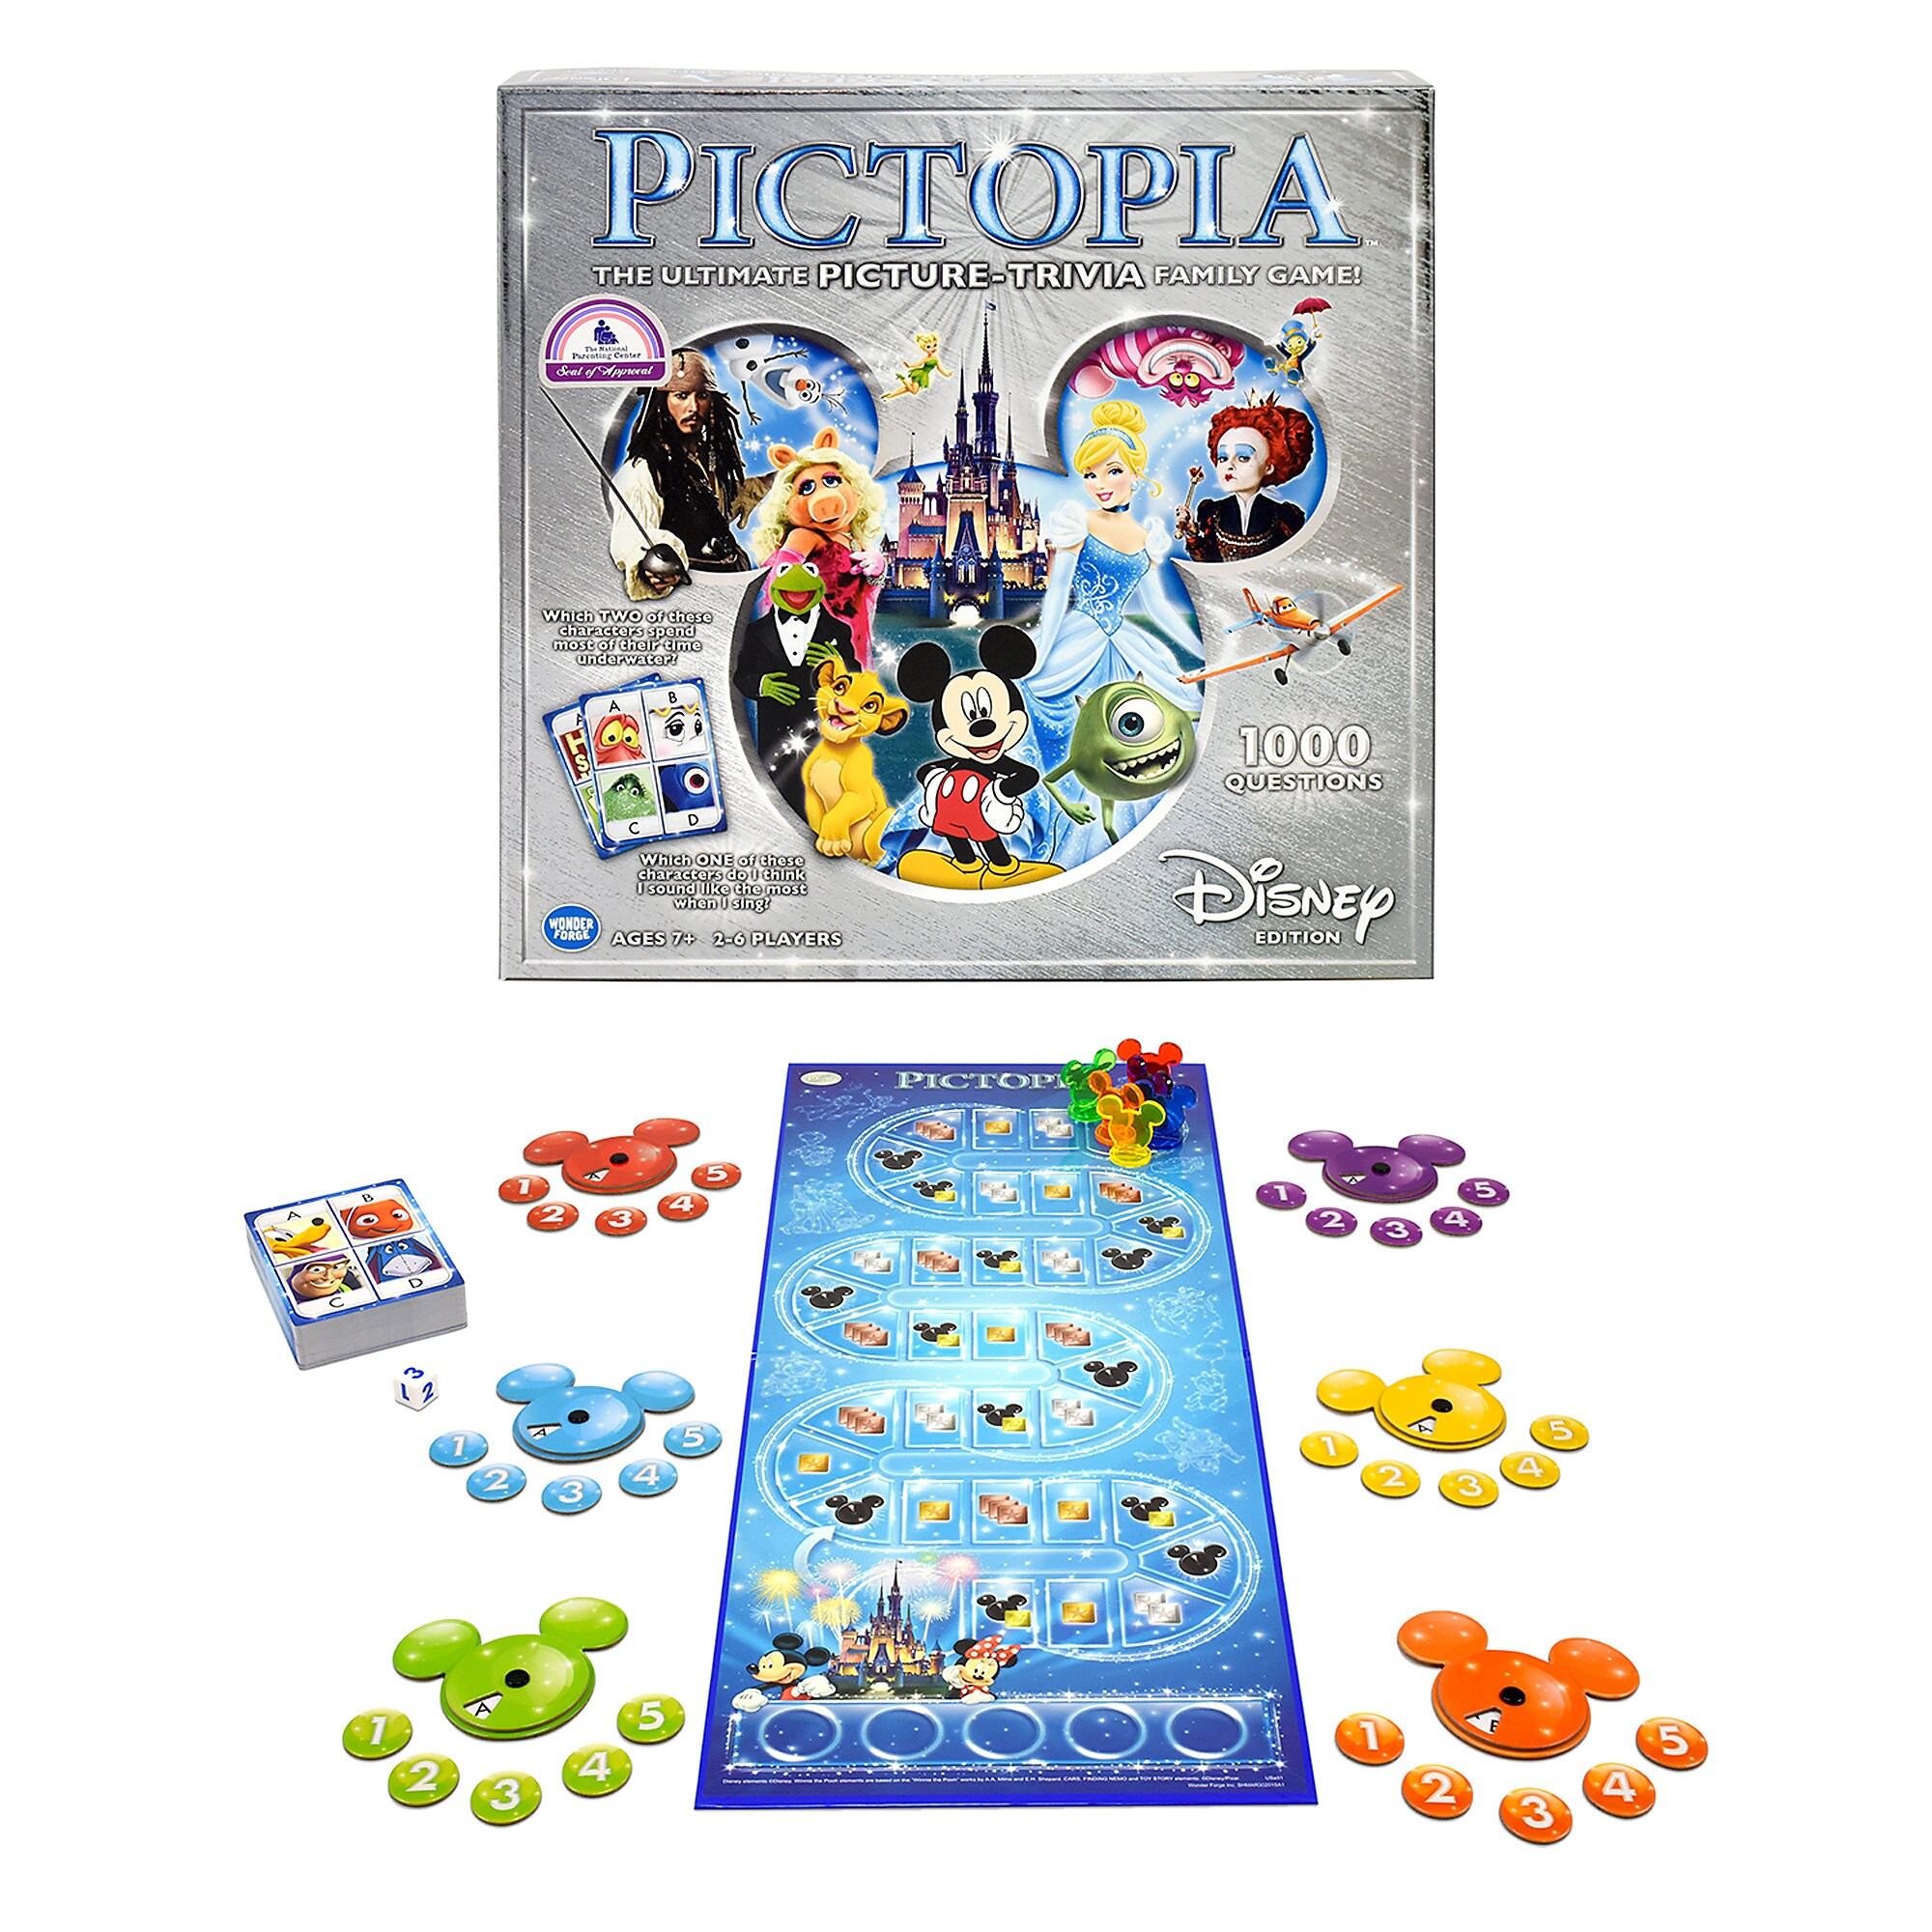 Disney Pictopia Board Game by Ravensburger